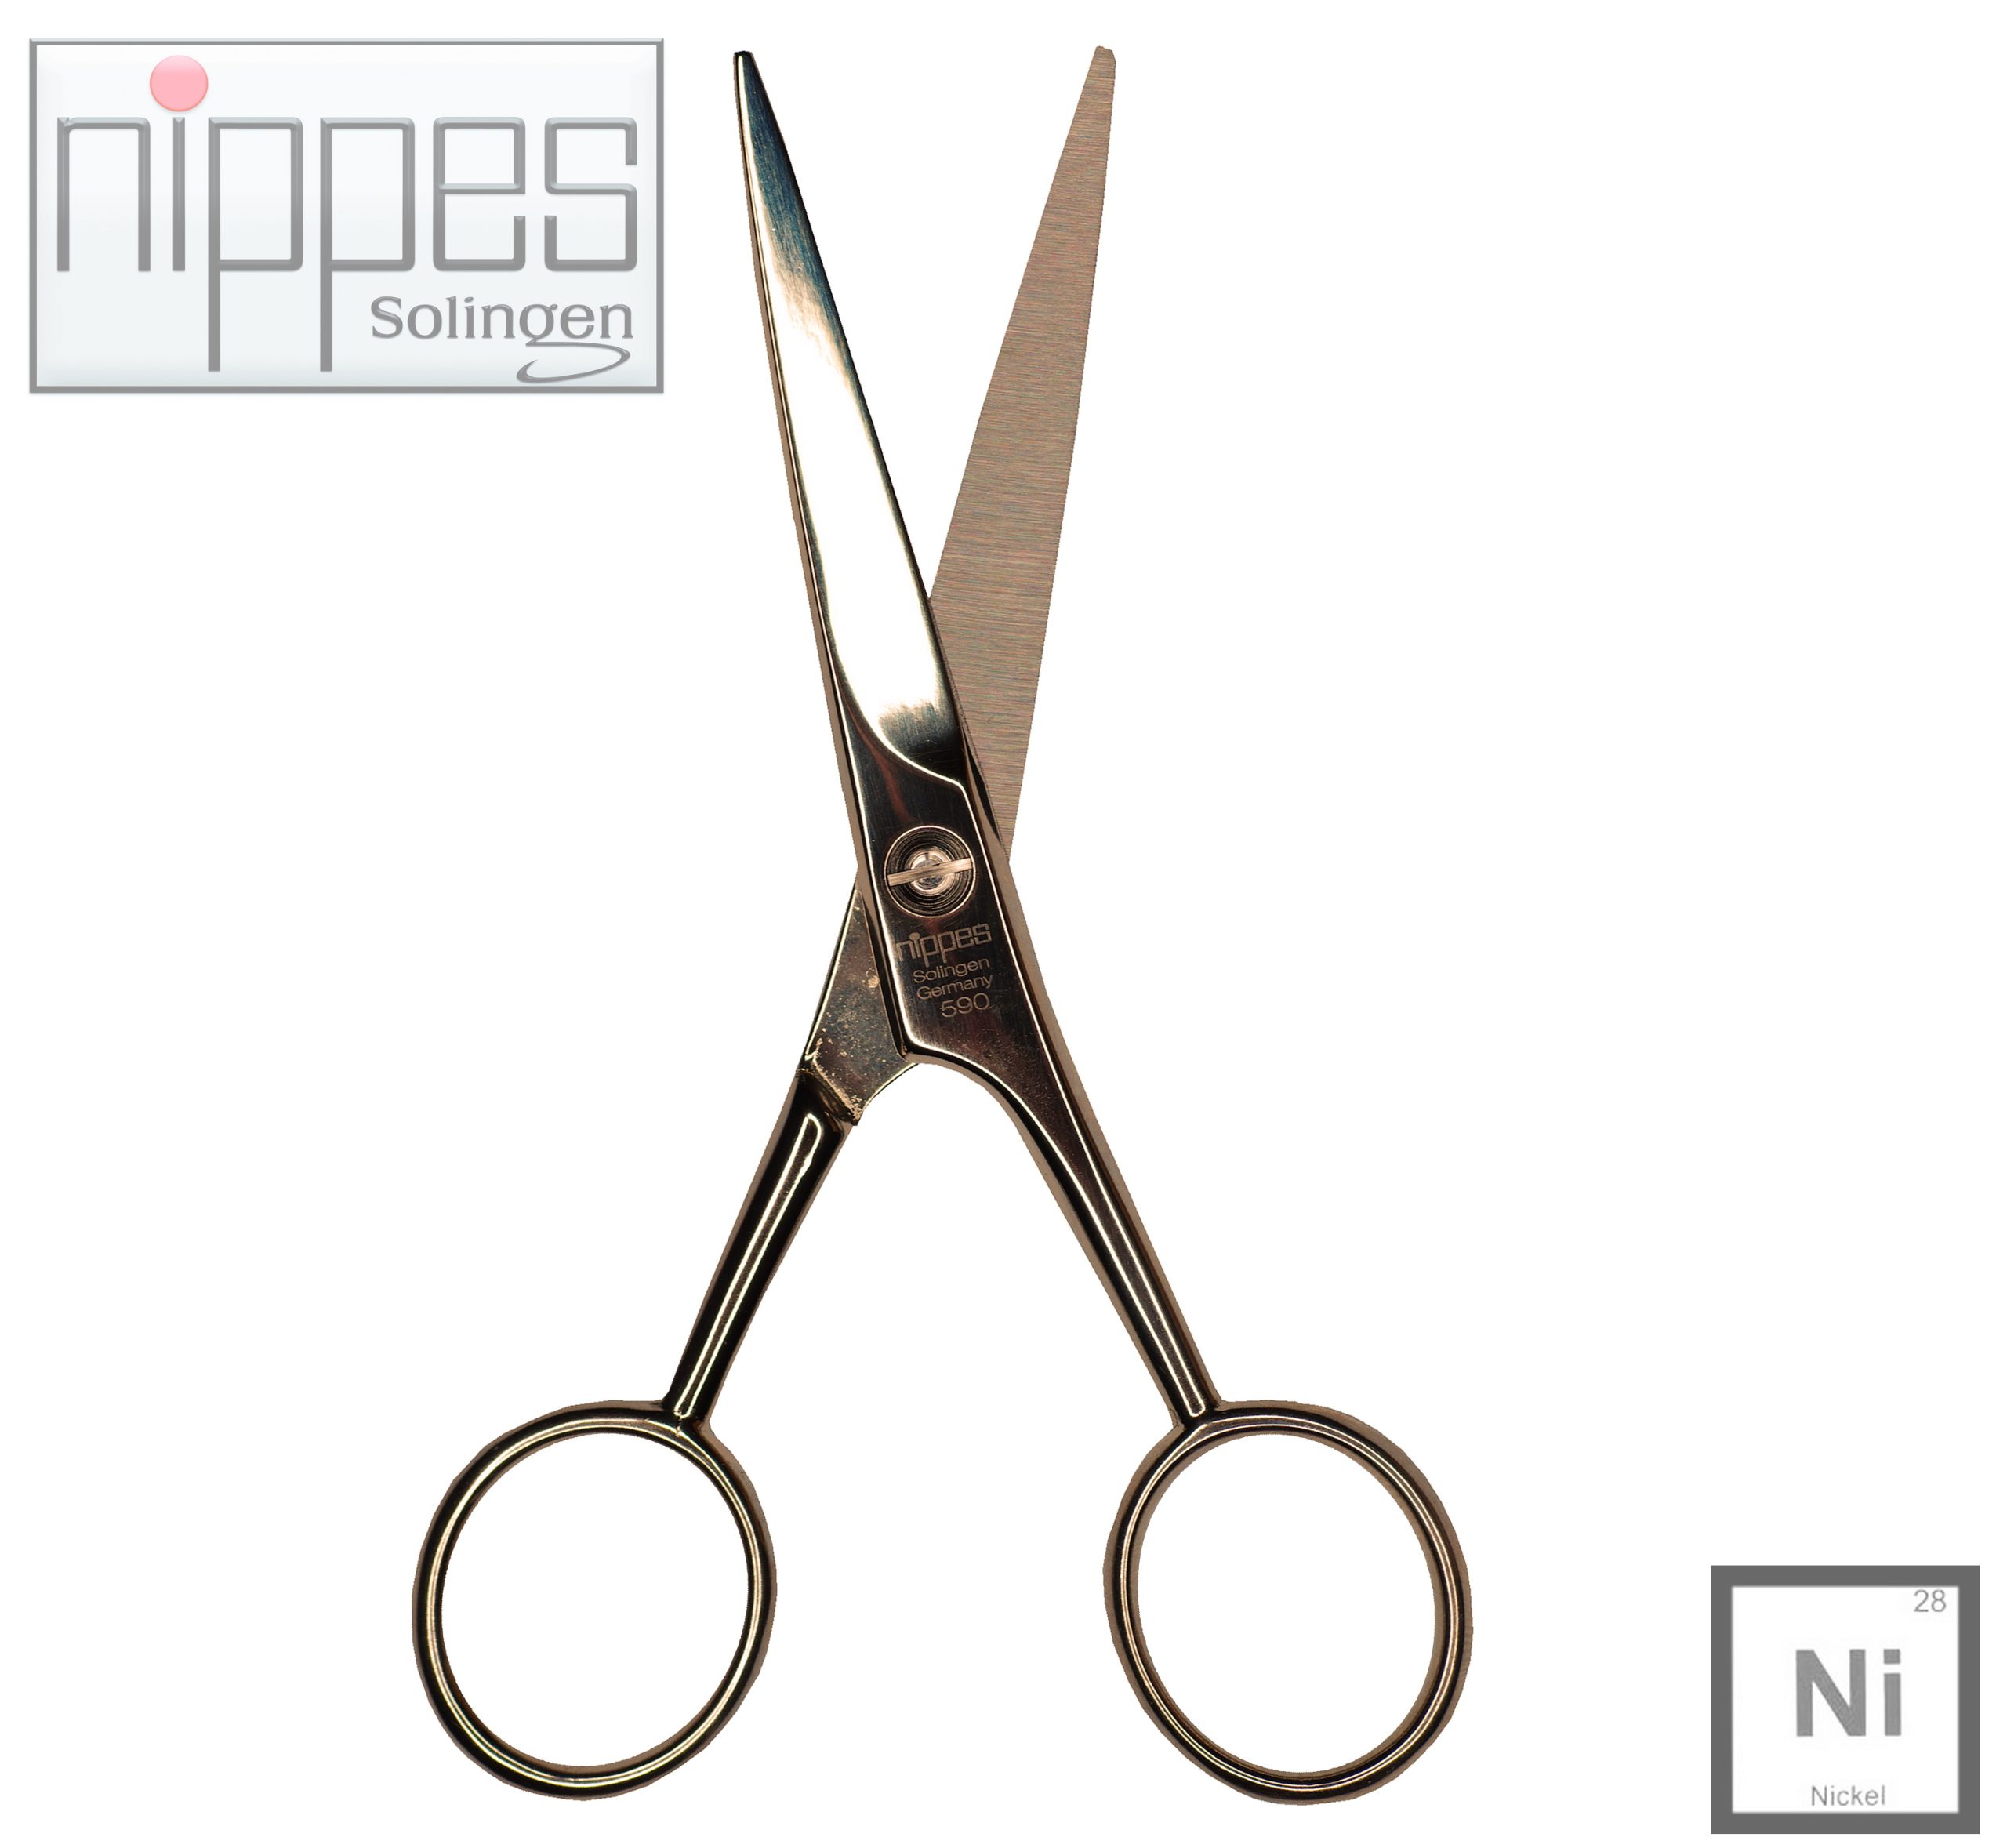 Professional Barber Hair GERMAN Cutting Shears Scissors Ice Tempered 5.5  Inch 